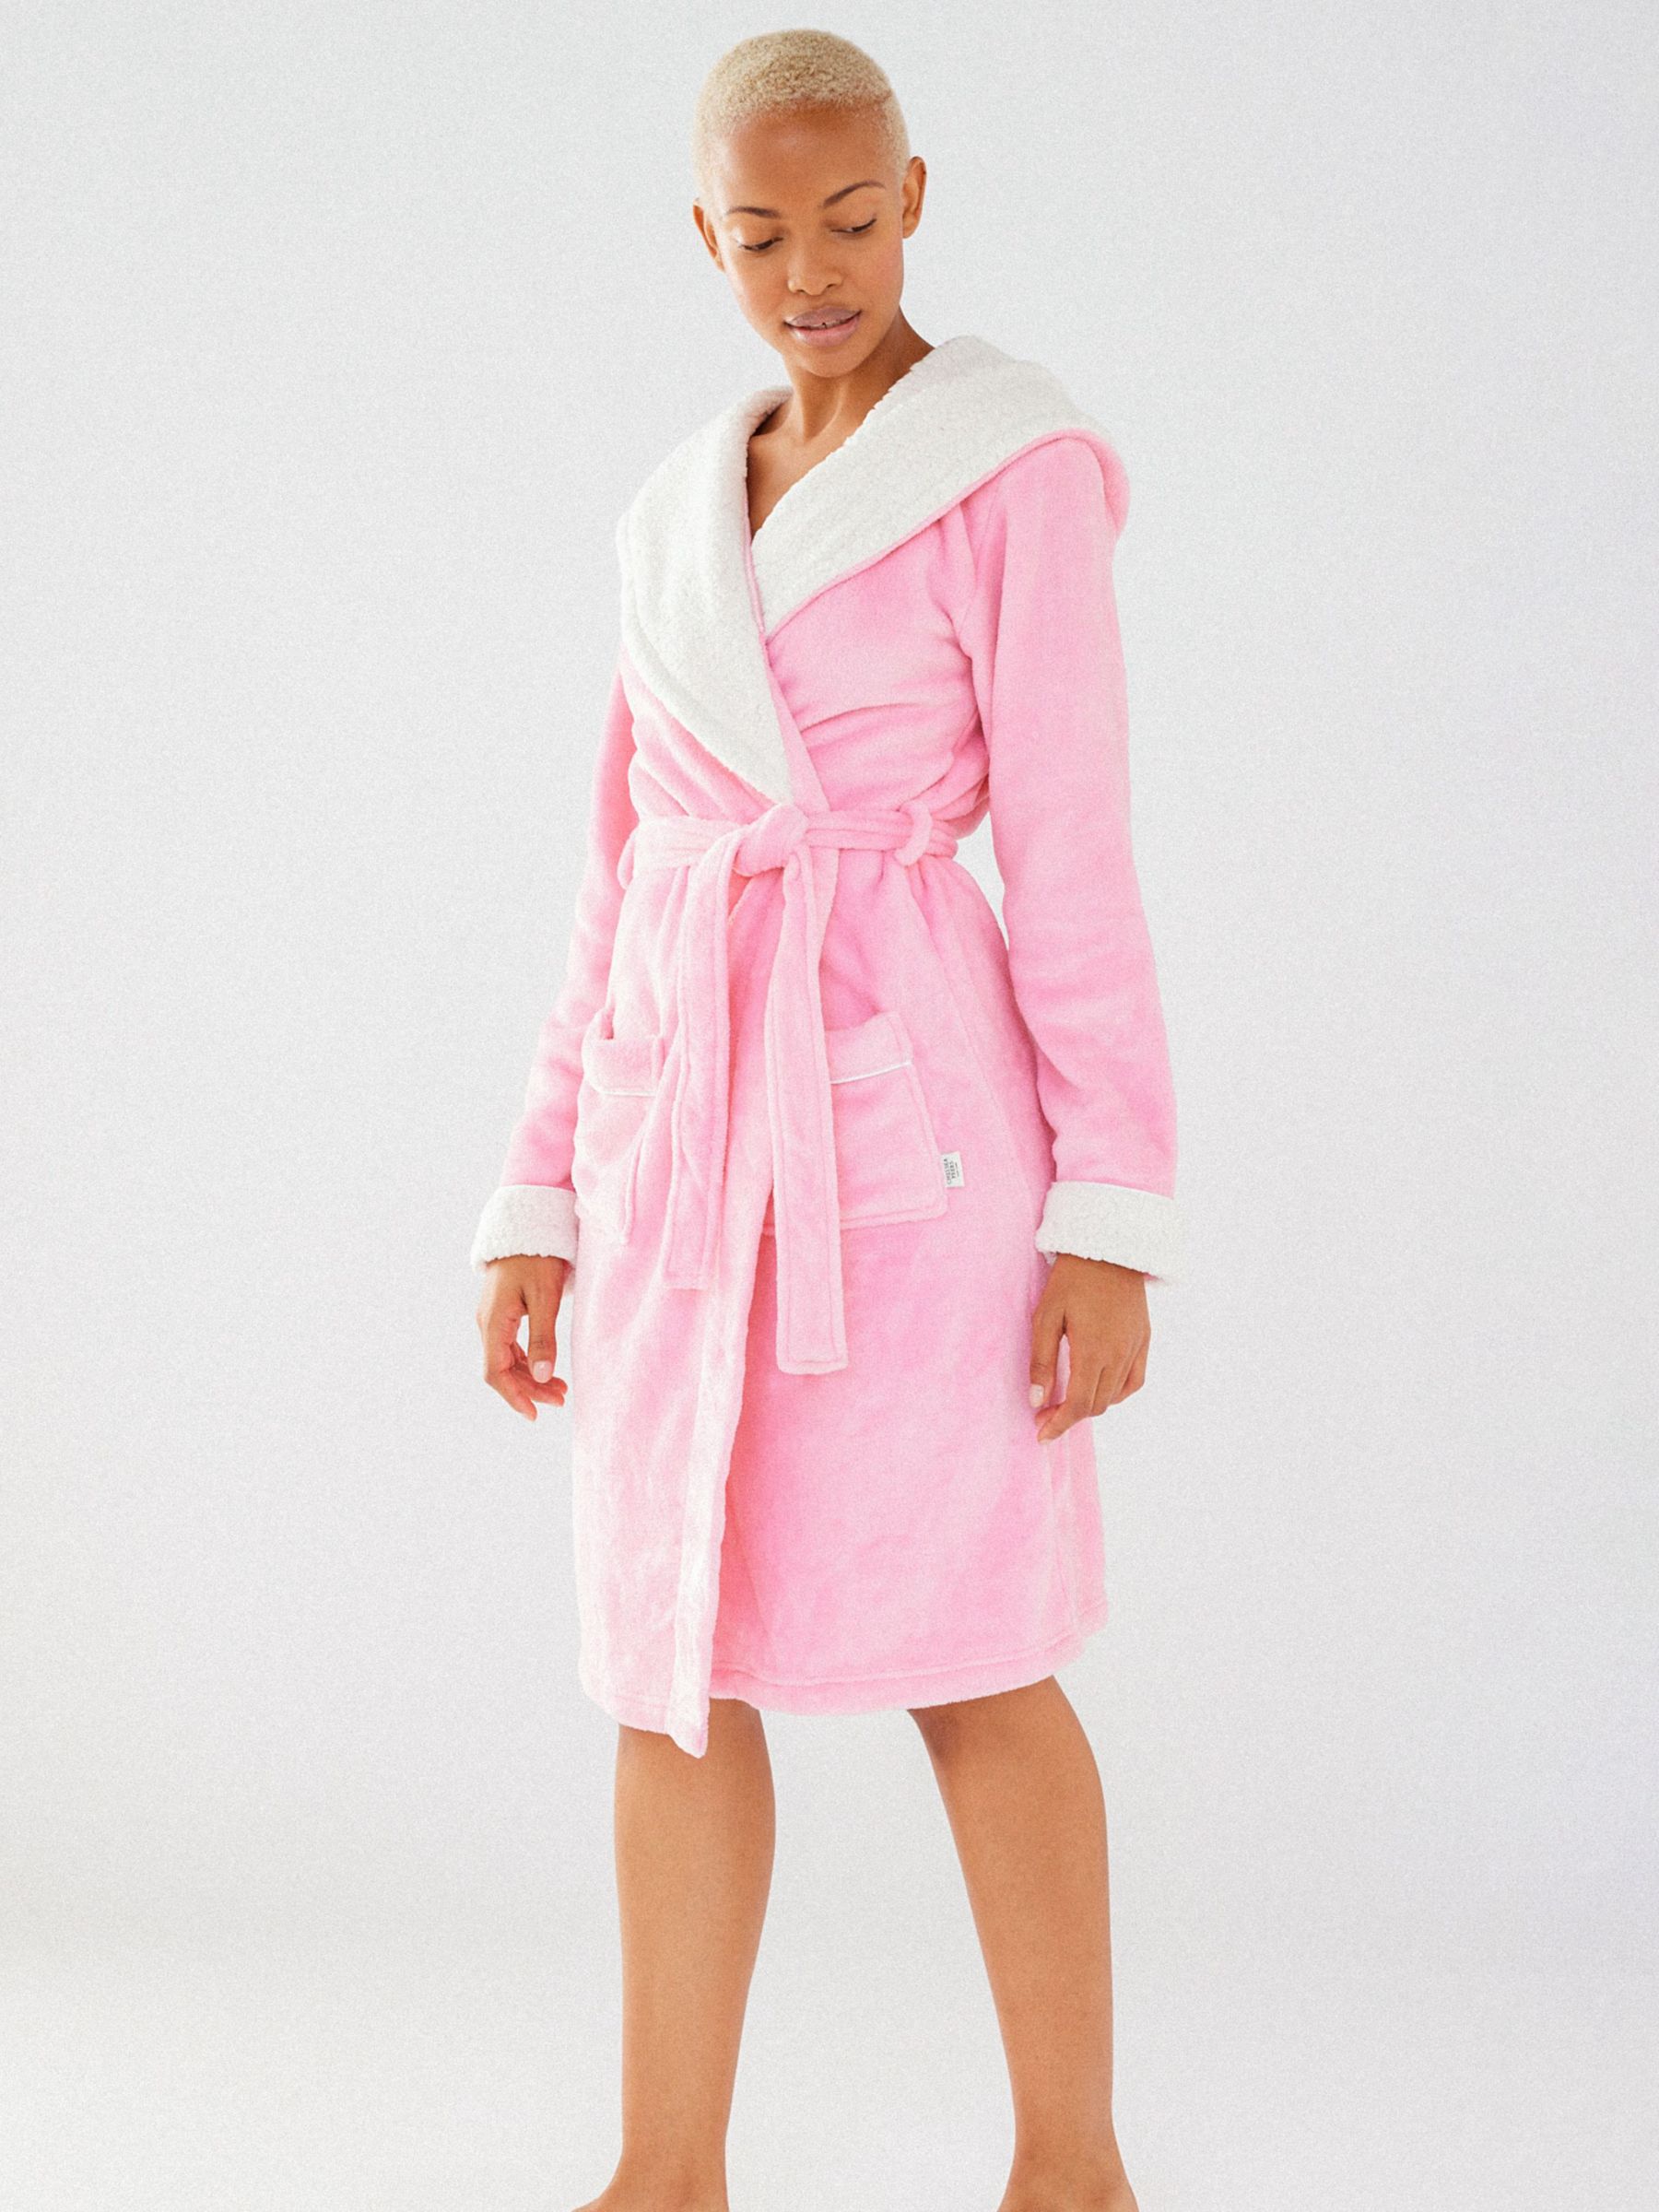 Chelsea Peers Fluffy Hooded Dressing Gown, Pink, 10